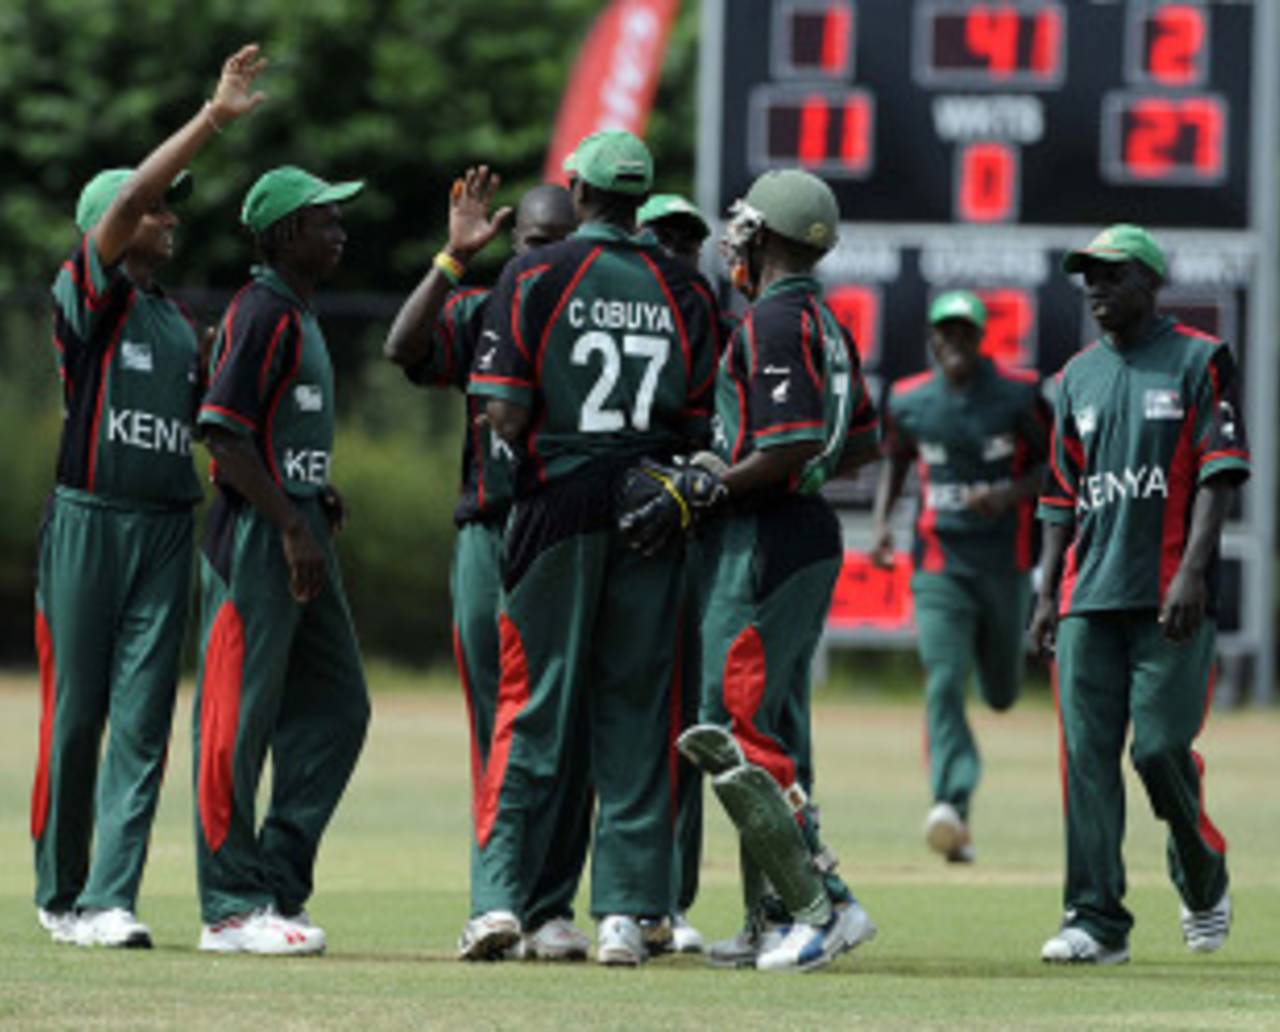 While Kenya have no worries in the bowling department, the batting still needs to be worked on, according to coach Eldine Baptiste&nbsp;&nbsp;&bull;&nbsp;&nbsp;International Cricket Council